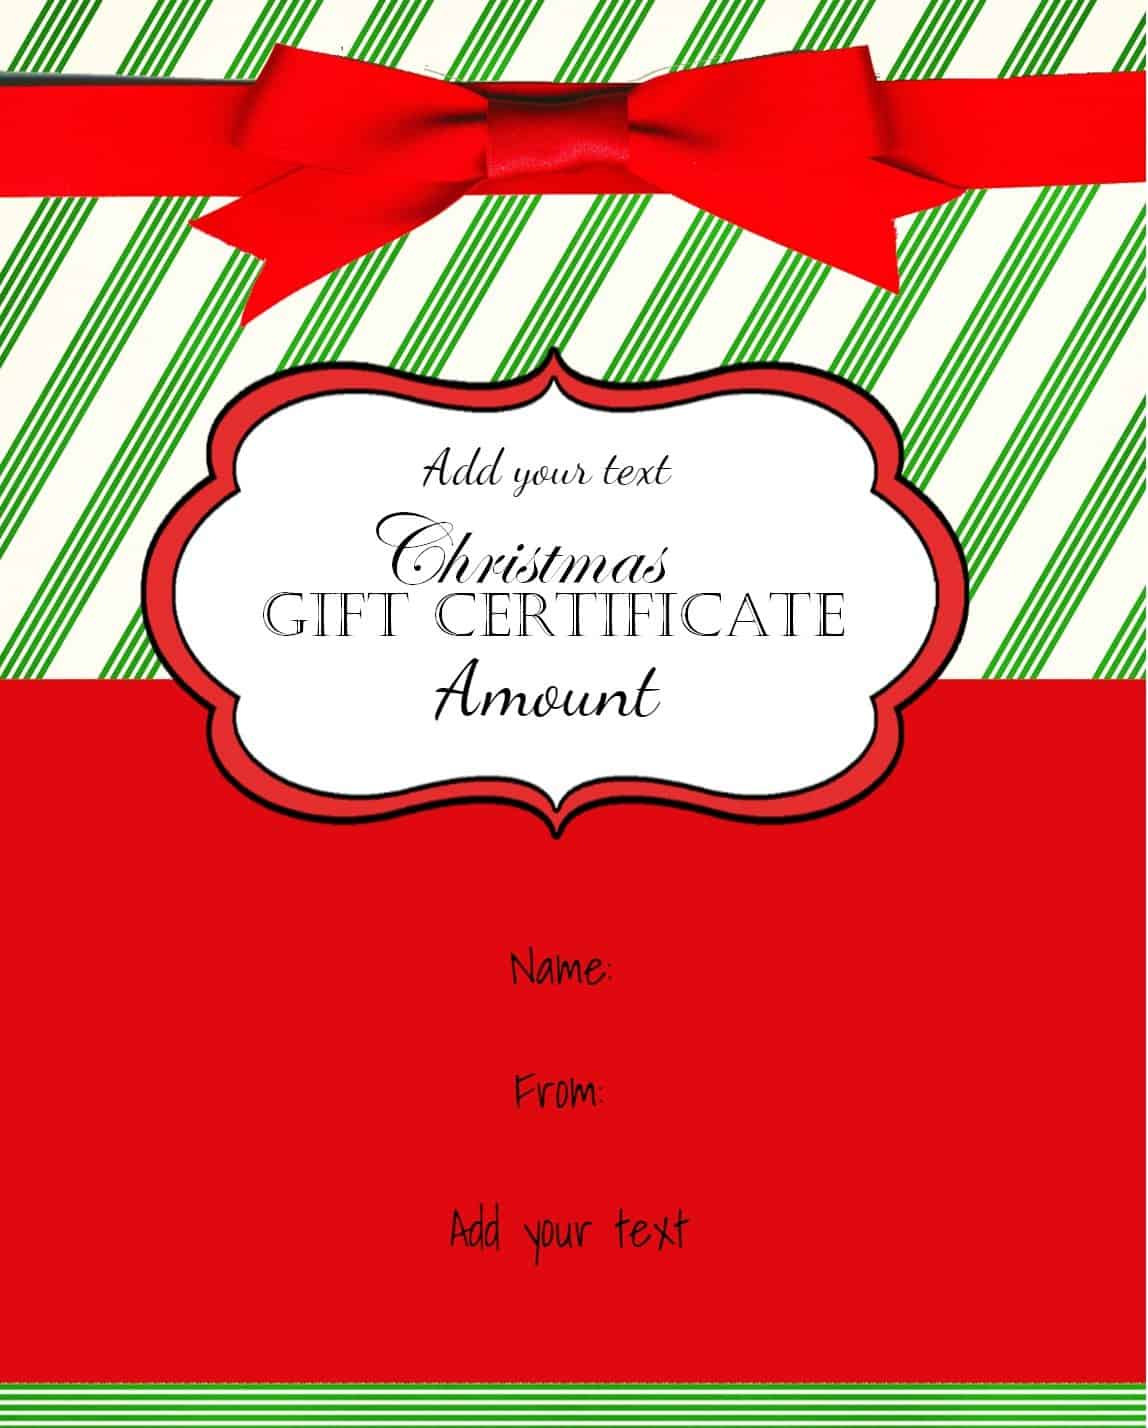 FREE Christmas Gift Certificate Template Customize & Download